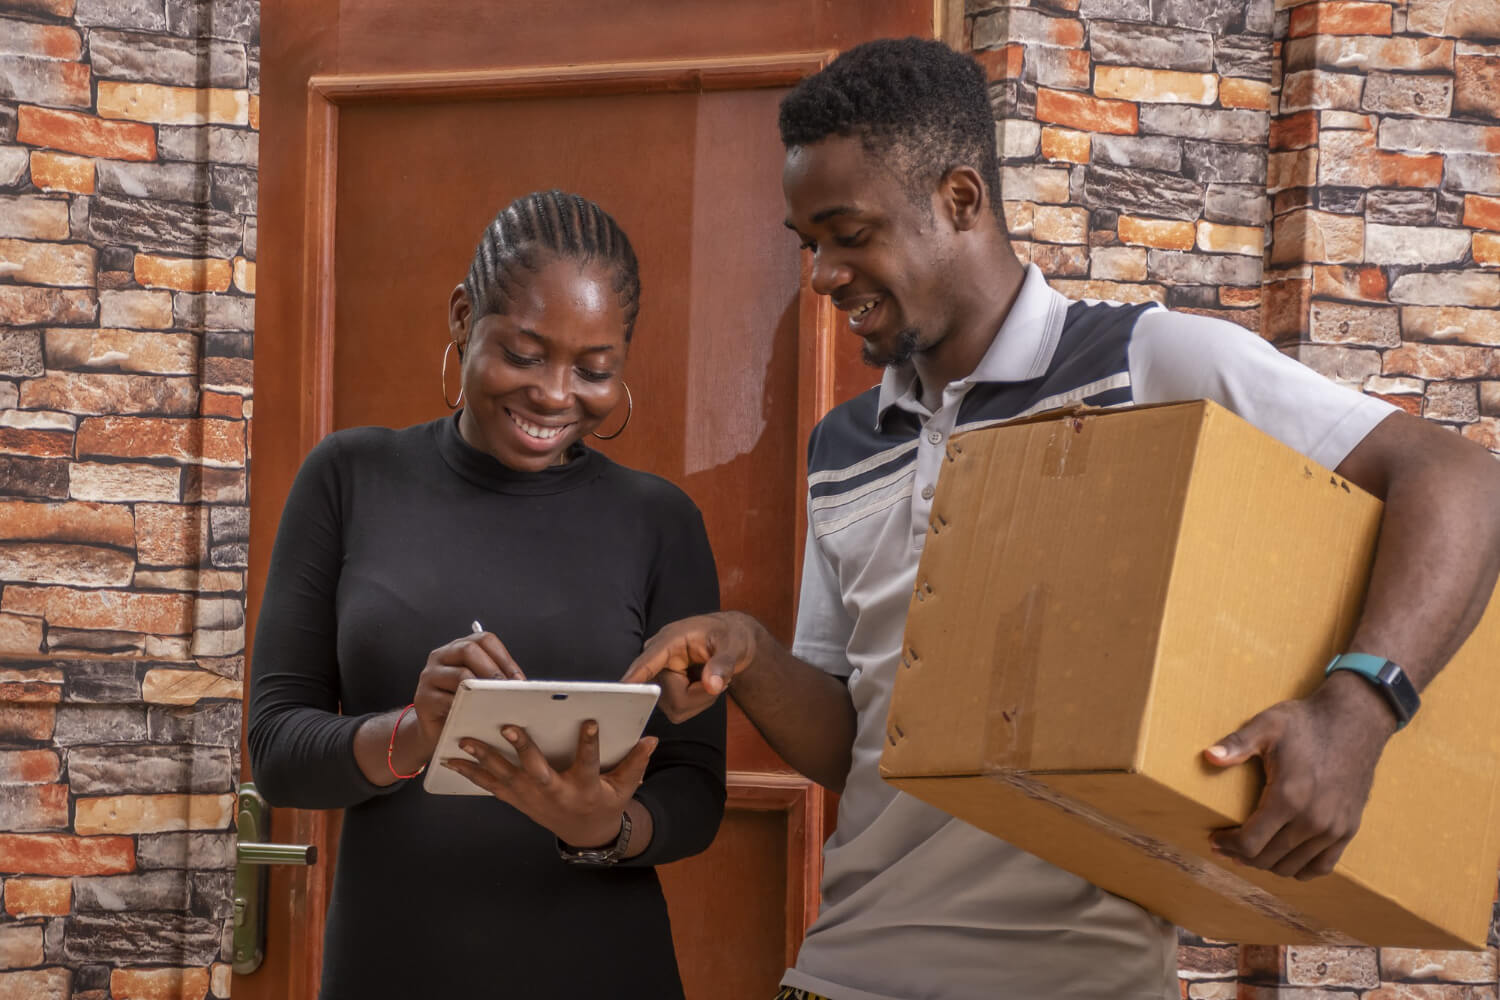 Smiling woman receiving a package from a man and signing a proof of delivery